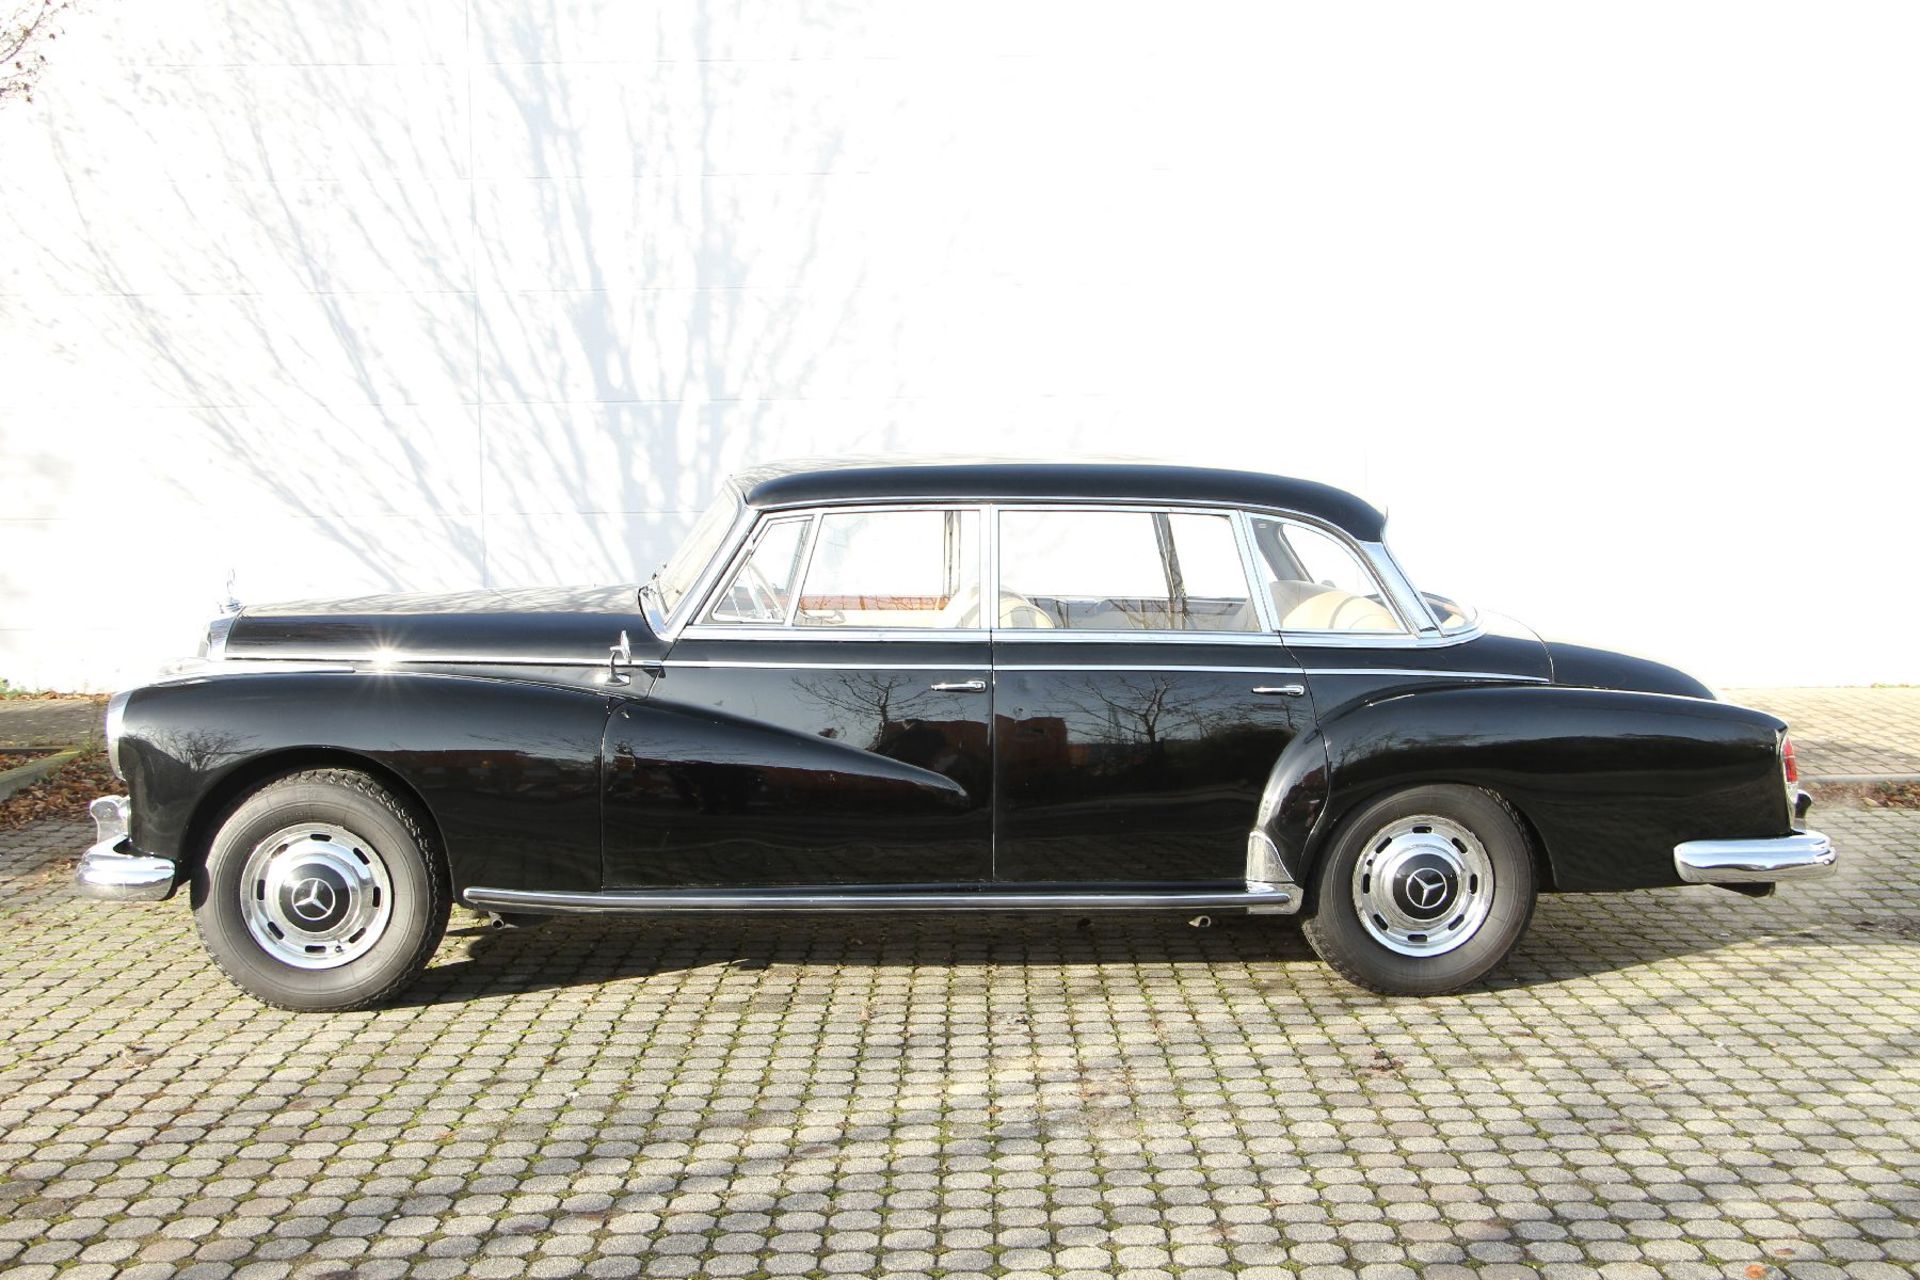 Mercedes-Benz 300d Adenauer, Chassis Number: 8500228, first registered 07/1958, two owners within - Bild 4 aus 16